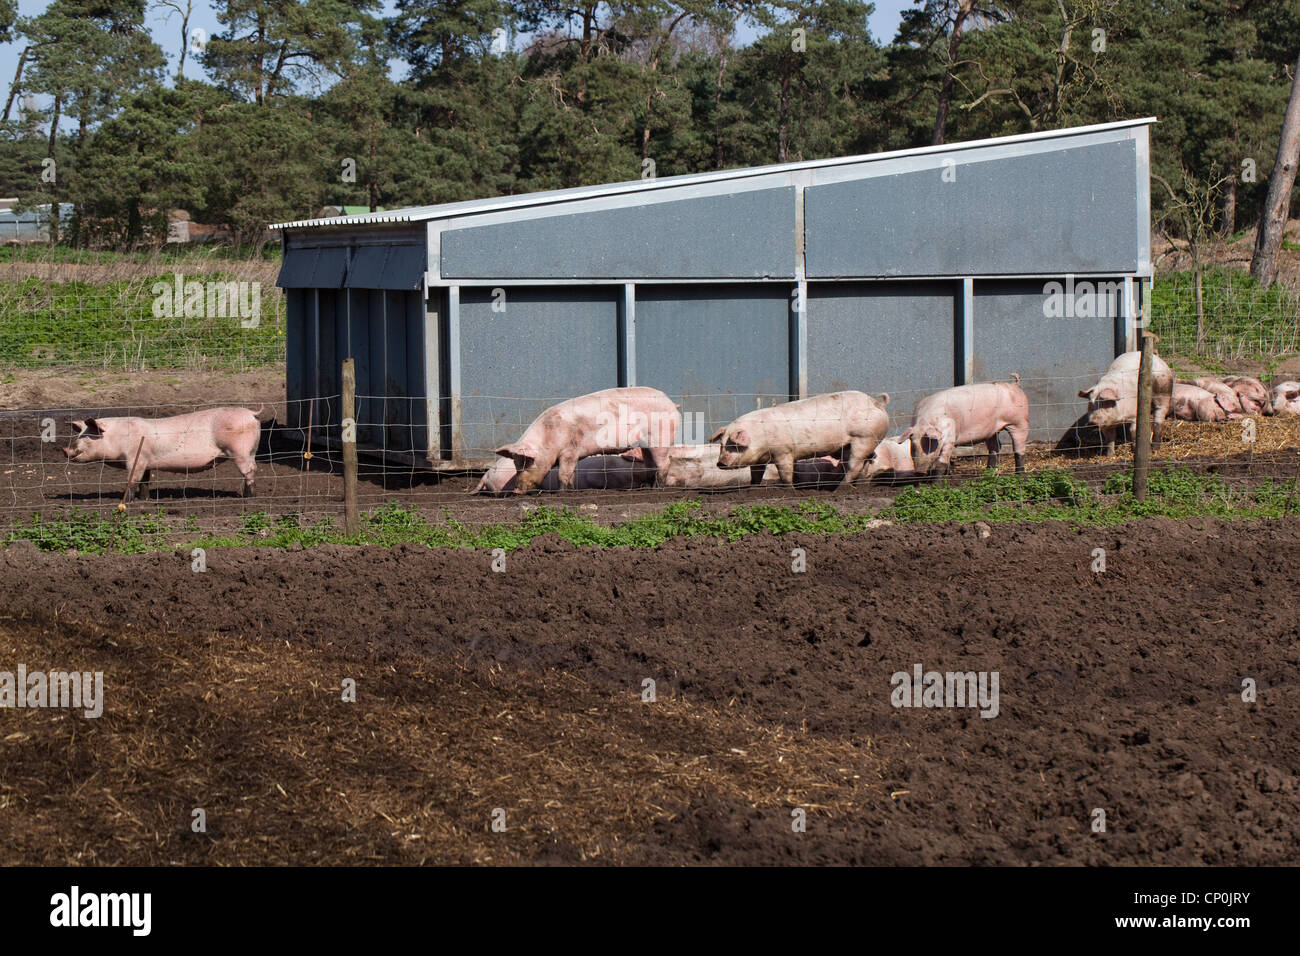 Domestic Pigs Sus scrofa. Pig Farm. Free ranging with Housing in an open air, outdoor enclosure. Stock Photo